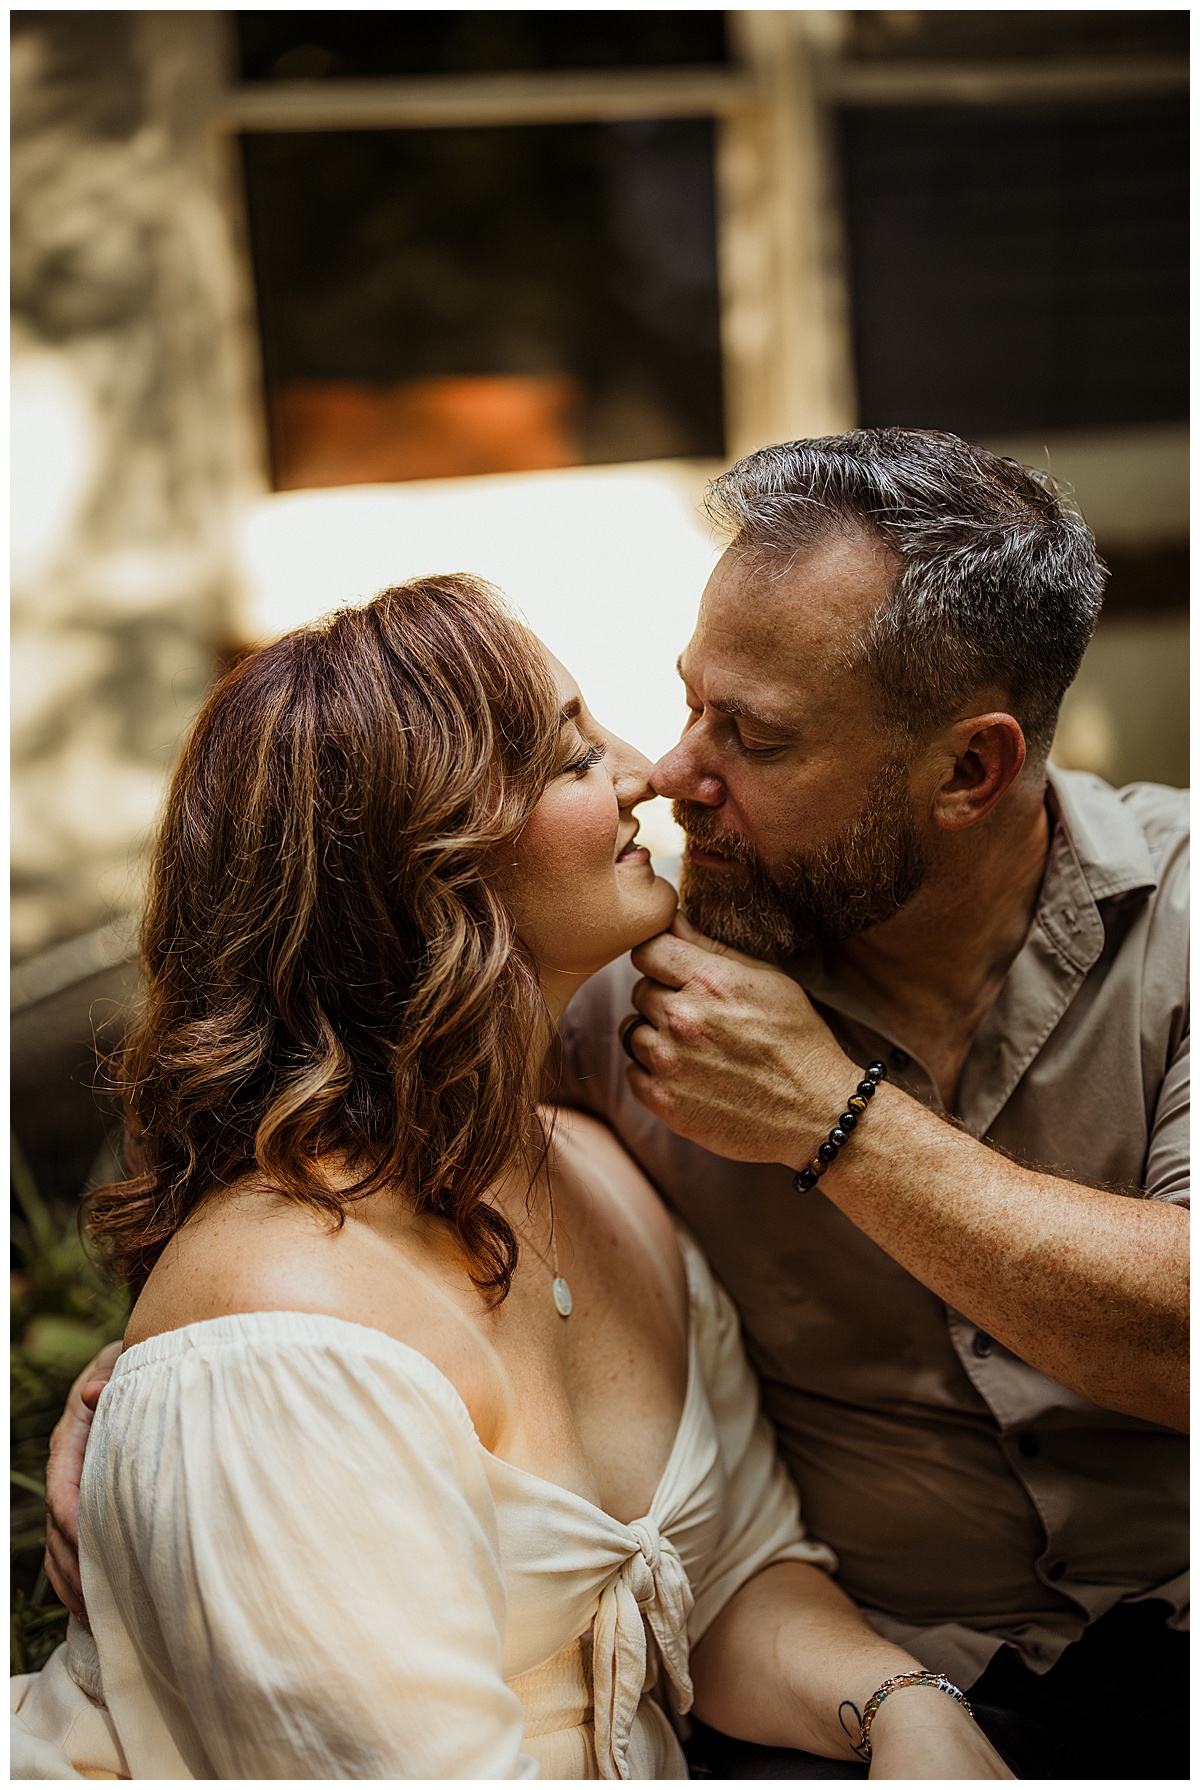 Mom and dad share intimate moment for Virginia Maternity Photographer